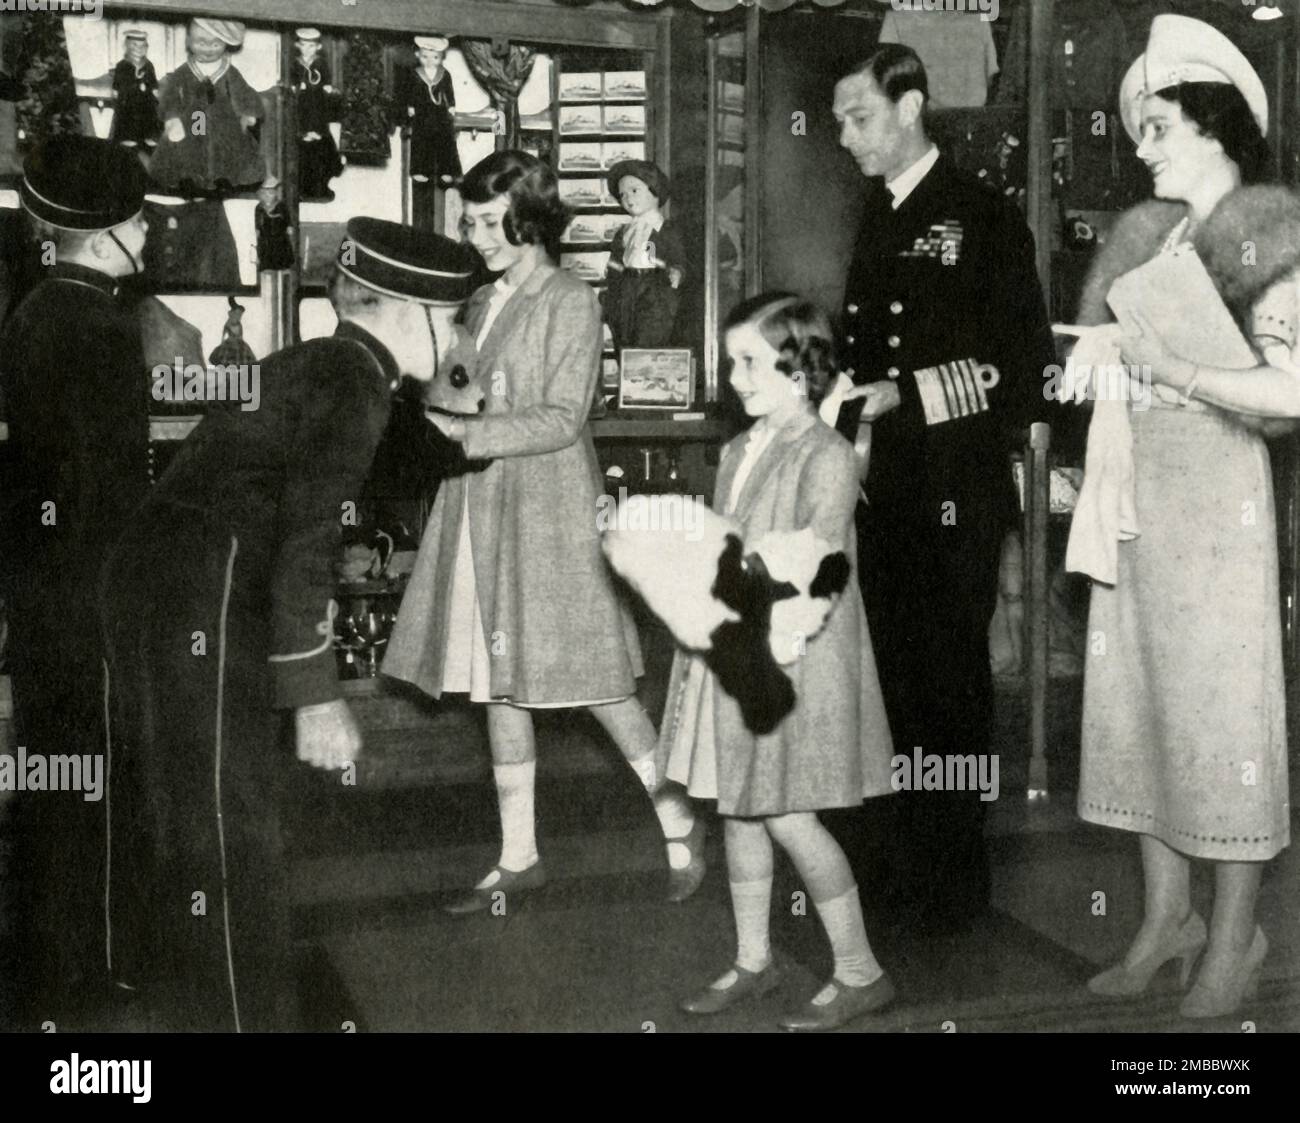 'Welcome Home', 22 June 1939, (1947). King George VI and Queen Elizabeth with daughters Princess Elizabeth (future Queen Elizabeth II) and Princess Margaret Rose. 'When the Princesses greeted their parents on their return from their tour of the United States and Canada...they were presented with toy pandas by members of the crew of the &quot;Empress of Britain&quot;, the ship which had brought the King and Queen back to England'. From &quot;Princess Elizabeth: The Illustrated Story of Twenty-one Years in the Life of the Heir Presumptive&quot;, by Dermot Morrah. [Odhams Press Limited, London, 1 Stock Photo